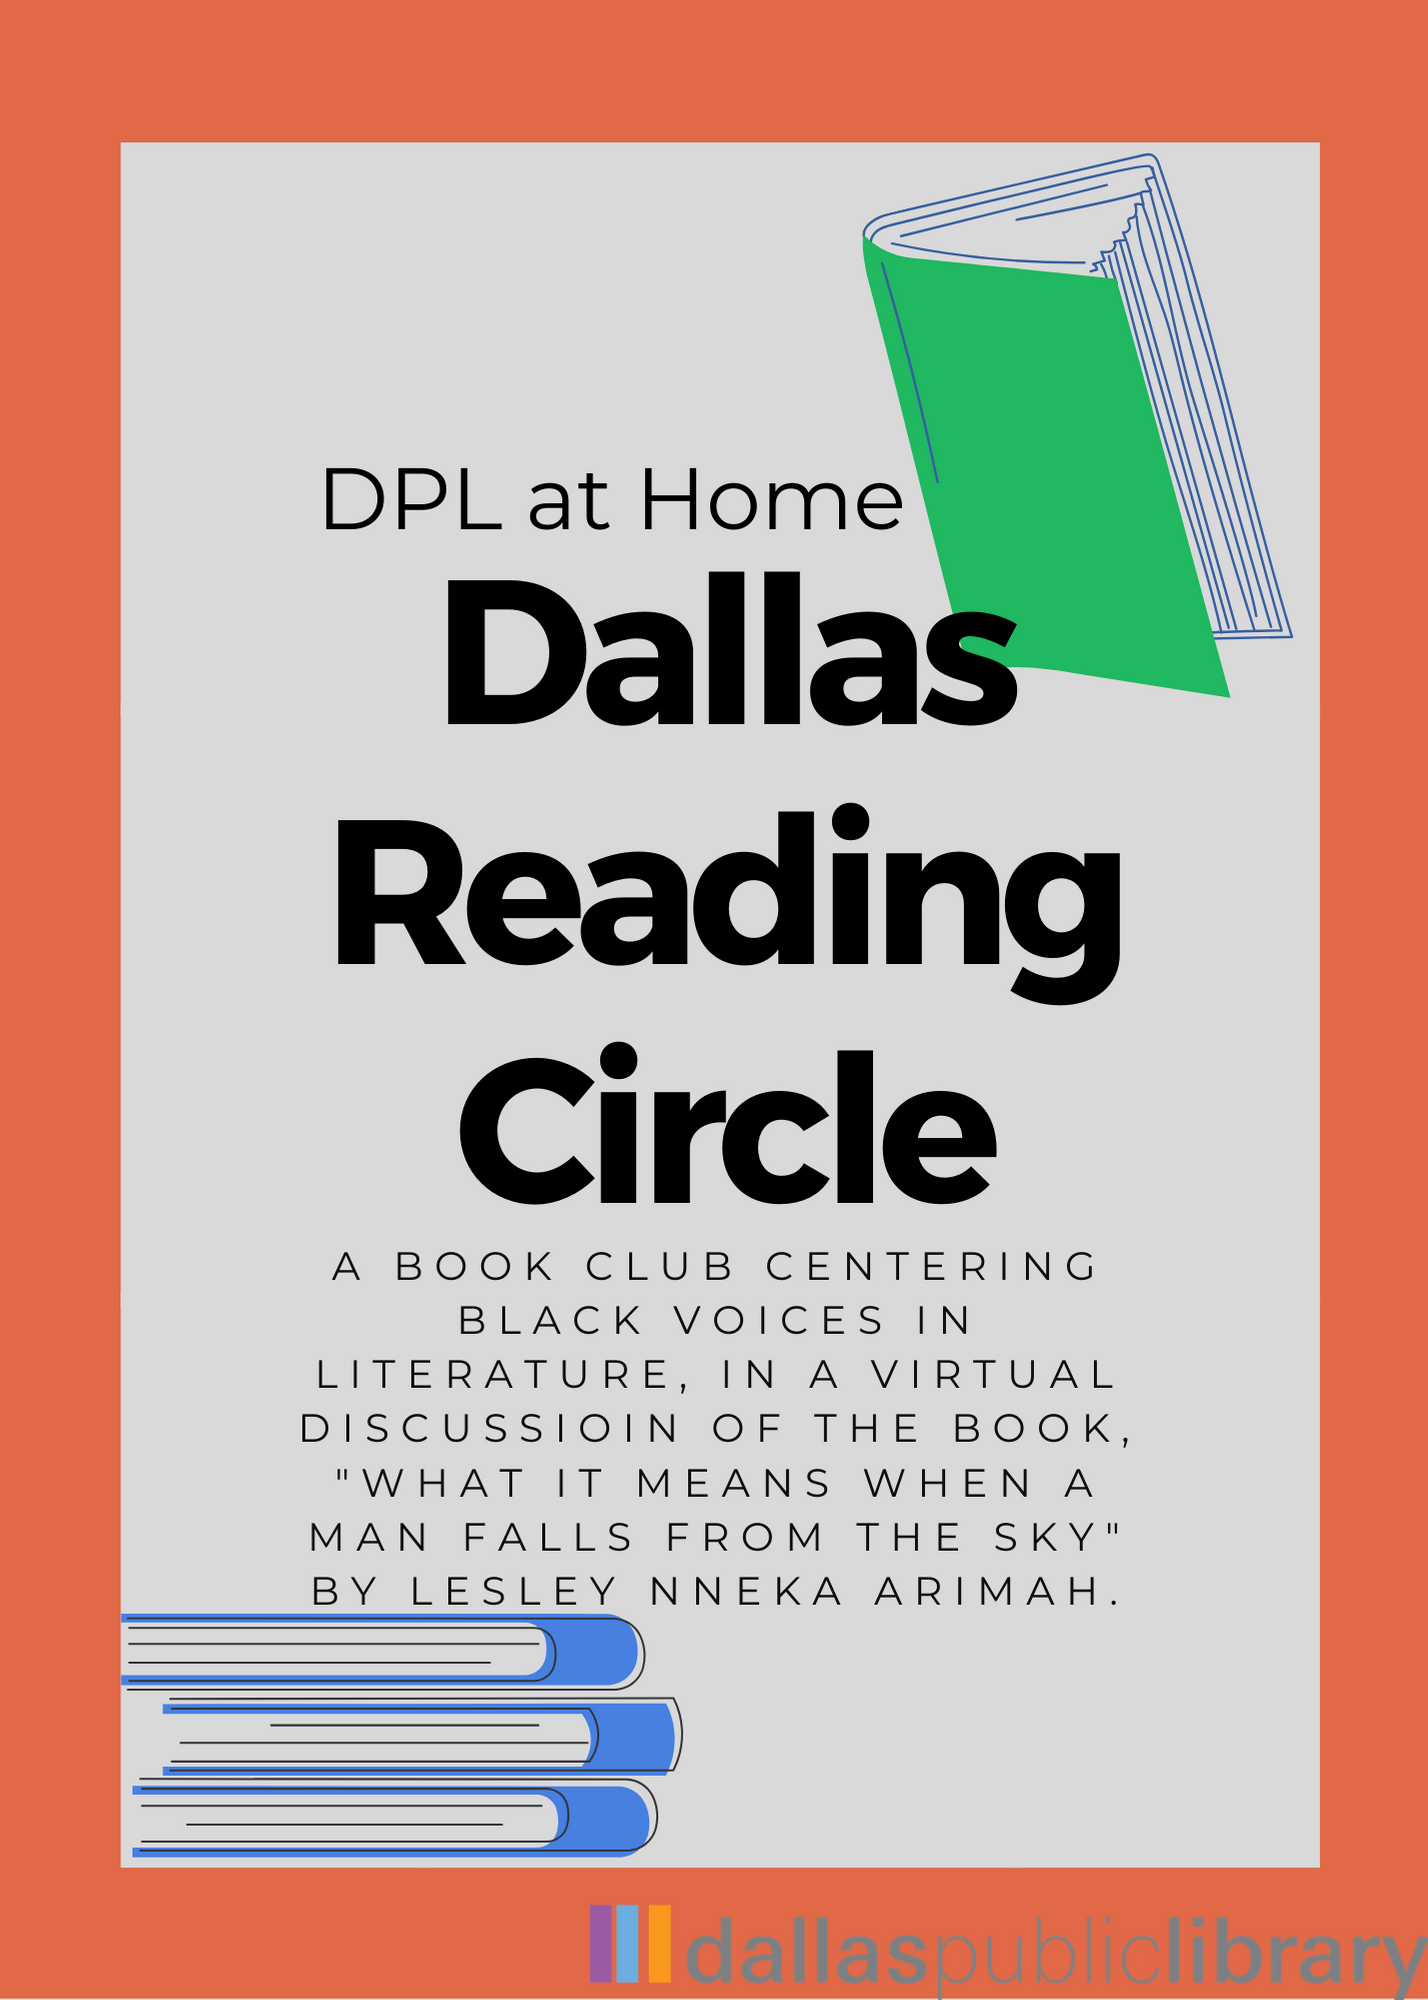 Flyer for DPL at Home Dallas Reading Circle with a green book on top left corner and a stack of blue books on bottom right. With text that says a book club centering Black voices in literature, in a virtual discussion of the book, "What It Means When a Man Falls From the Sky" by Lesley Nneka Arimah.